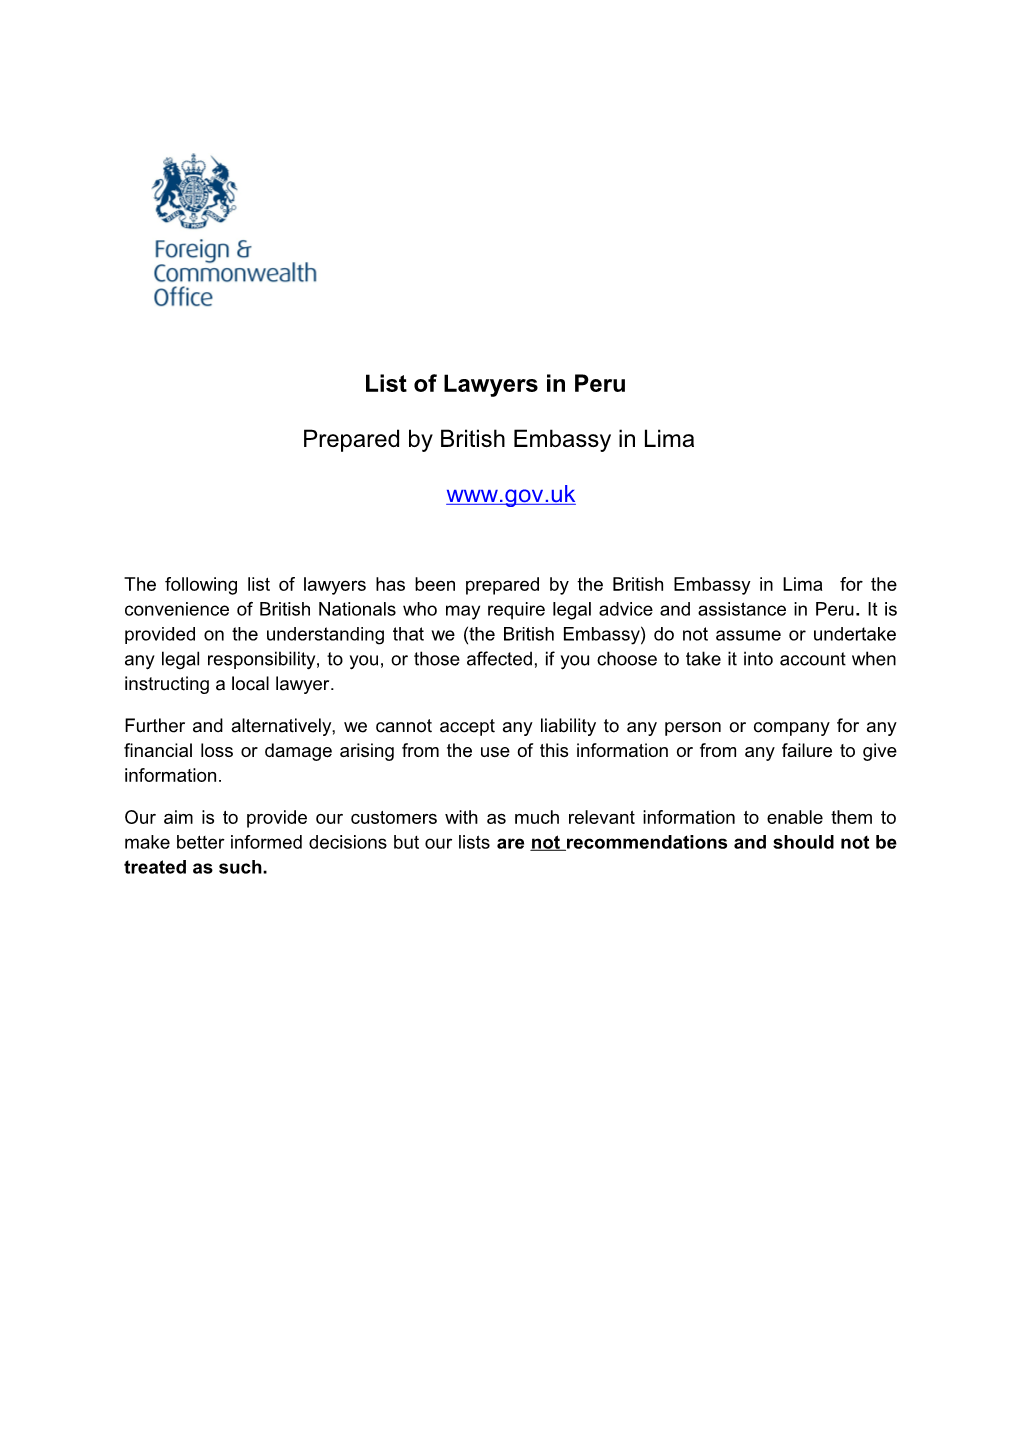 Annex E - Template for Lawyers List